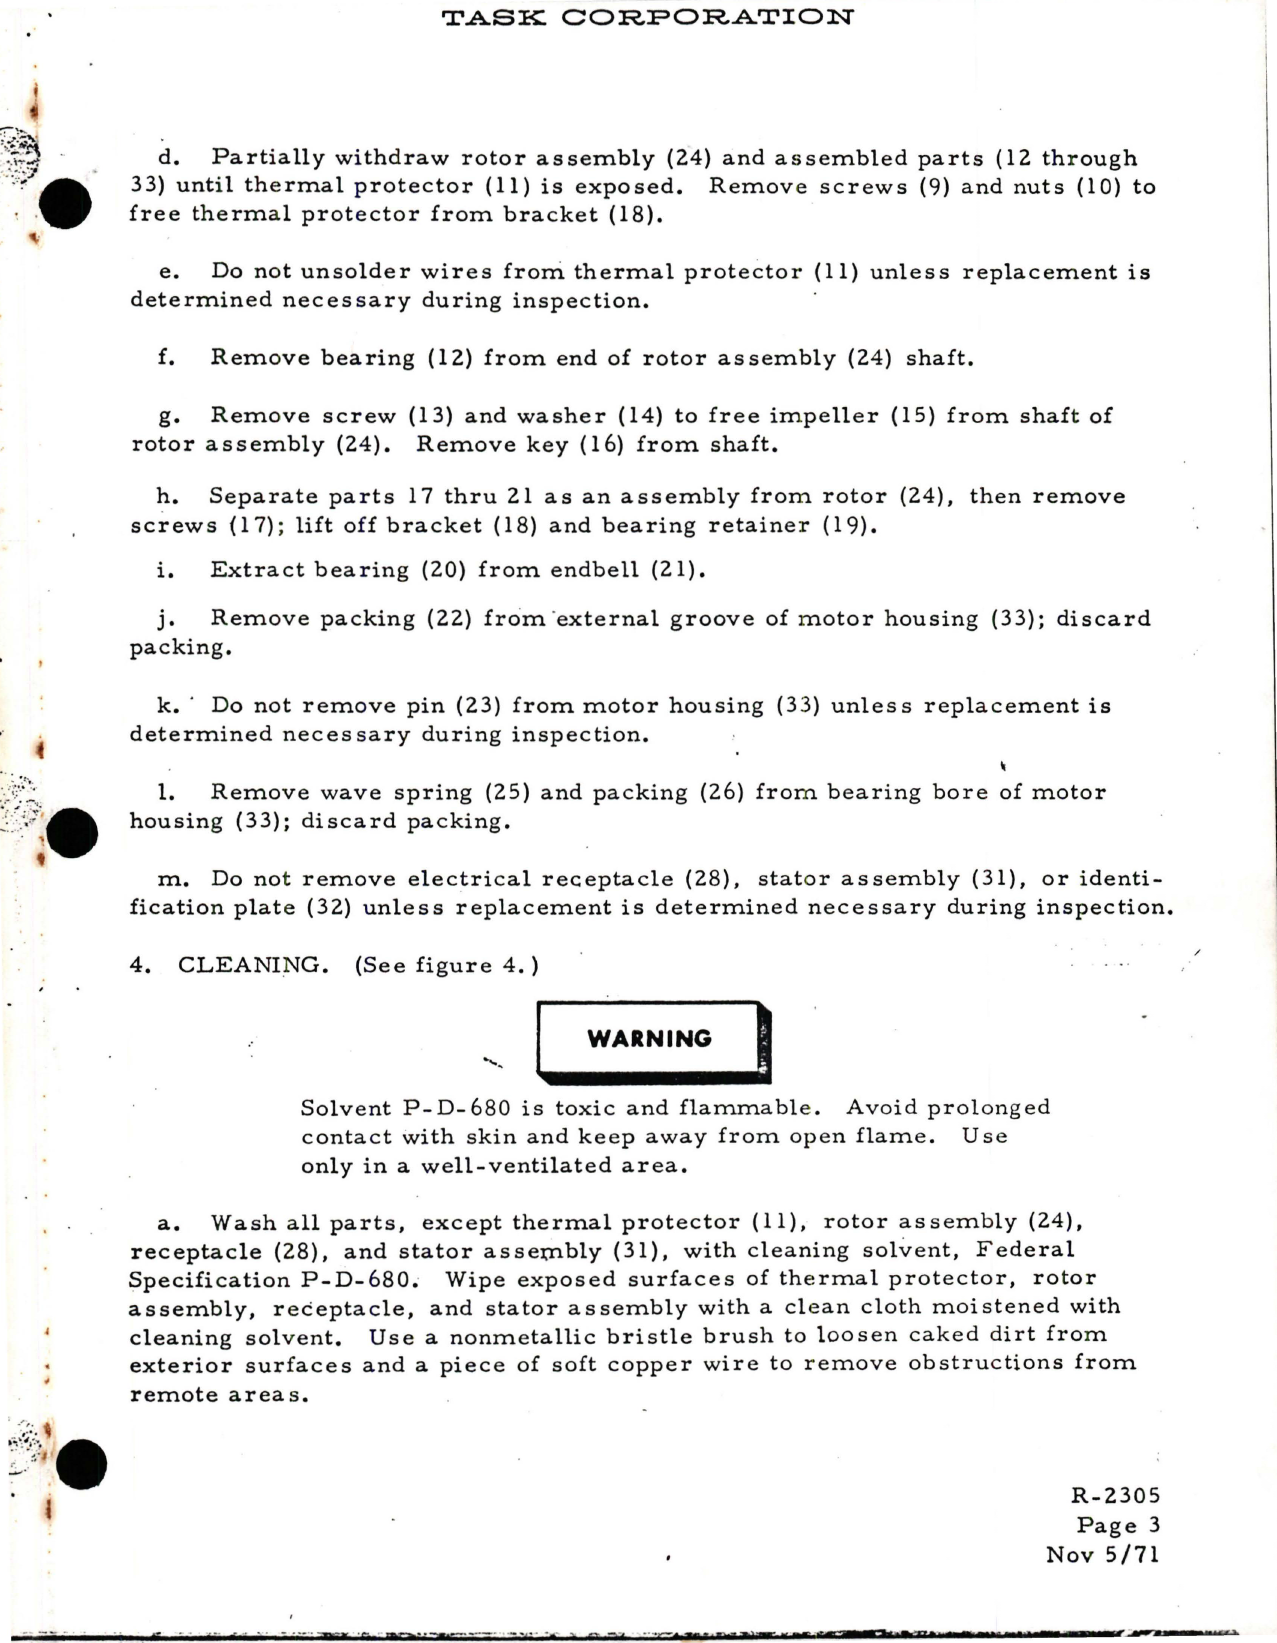 Sample page 9 from AirCorps Library document: Overhaul with Illustrated Parts Breakdown for Hydraulic Suction Boost Pump - Part 16430-1